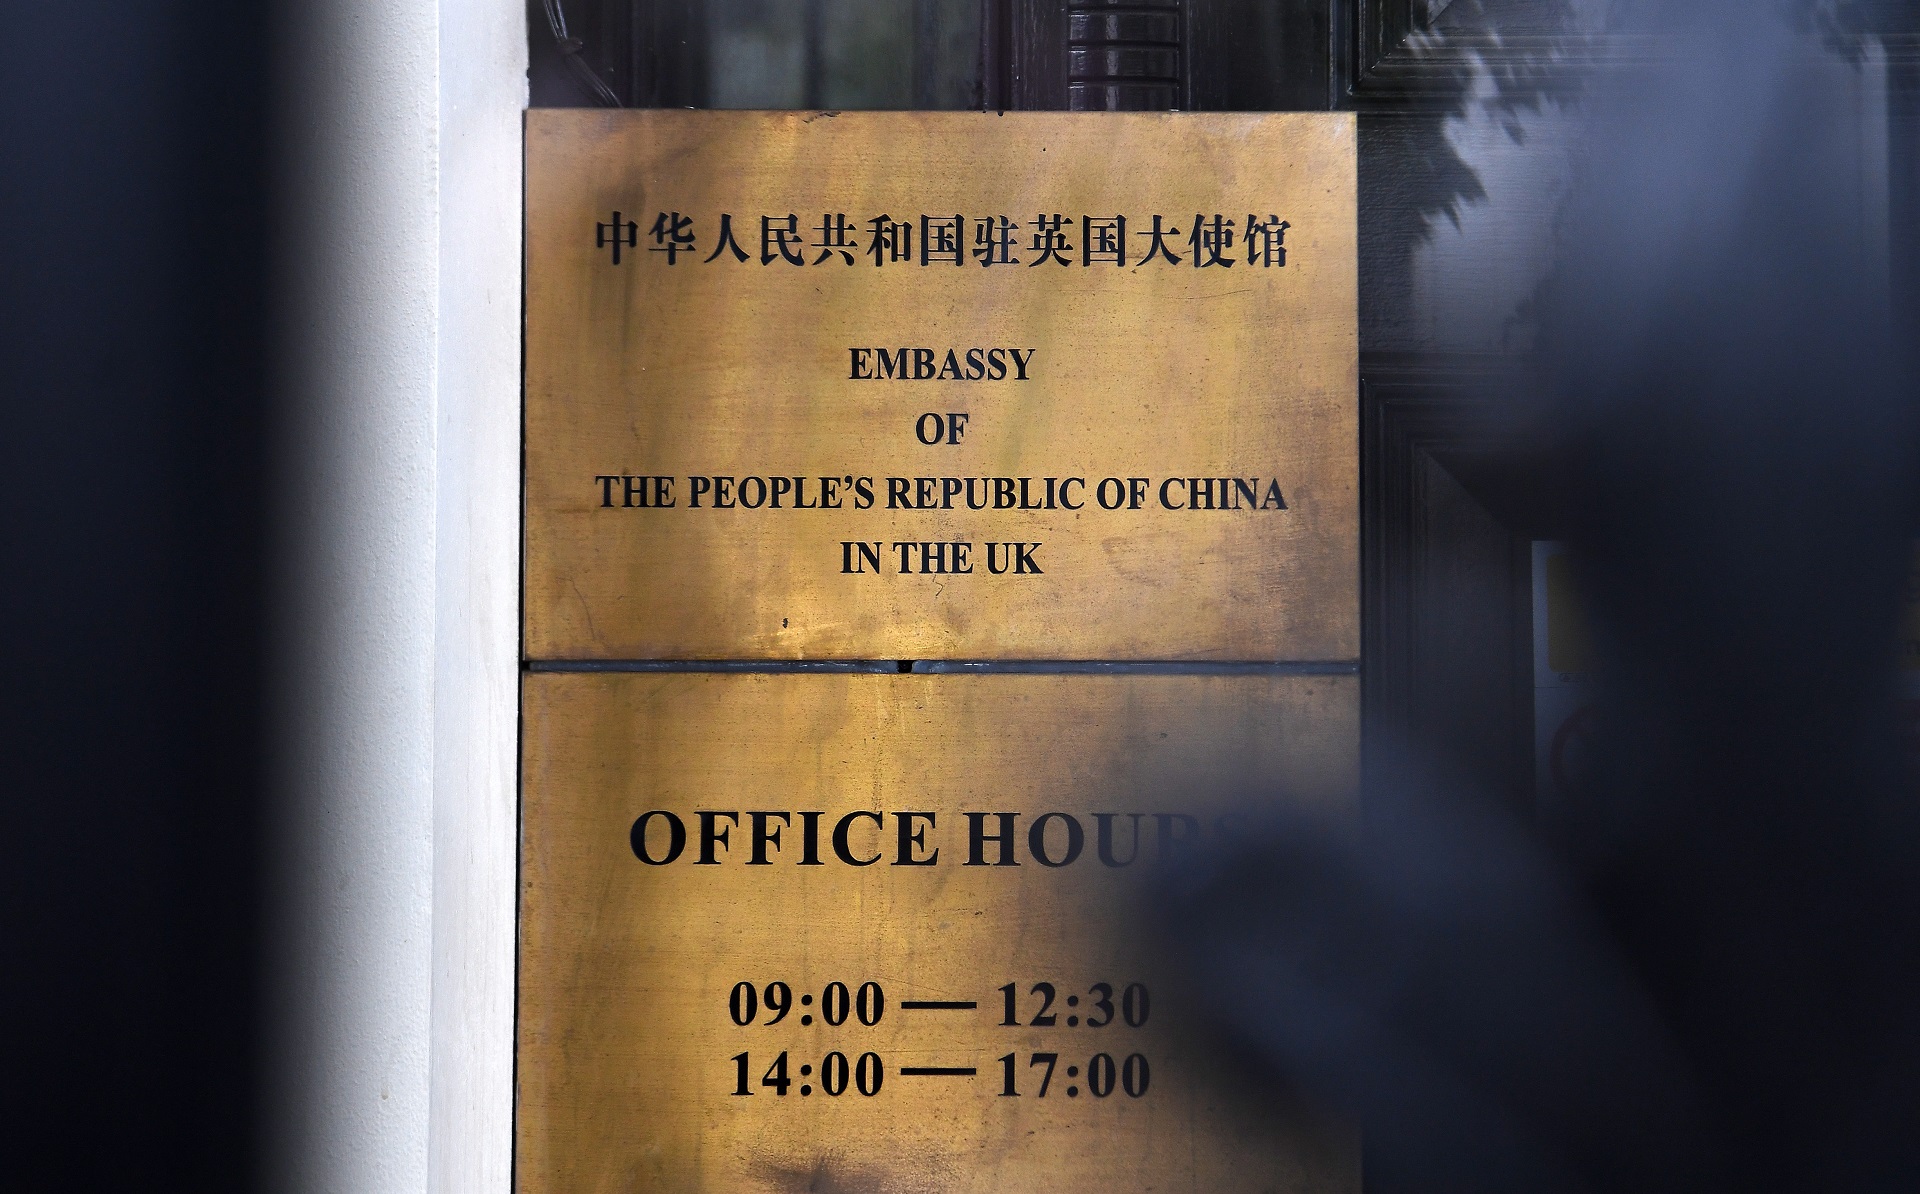 epa08522720 The Chinese Embassy in London, Britain, 02 July 2020. The UK government is offer some three million Hong Kong residents the chance to settle and apply for UK citizenship. British Prime Minister Boris Johnson has stated that China's passing of a new security law by the Hong Kong government was "clear and serious breach" of the 1985 Sino-British joint declaration.  EPA/ANDY RAIN